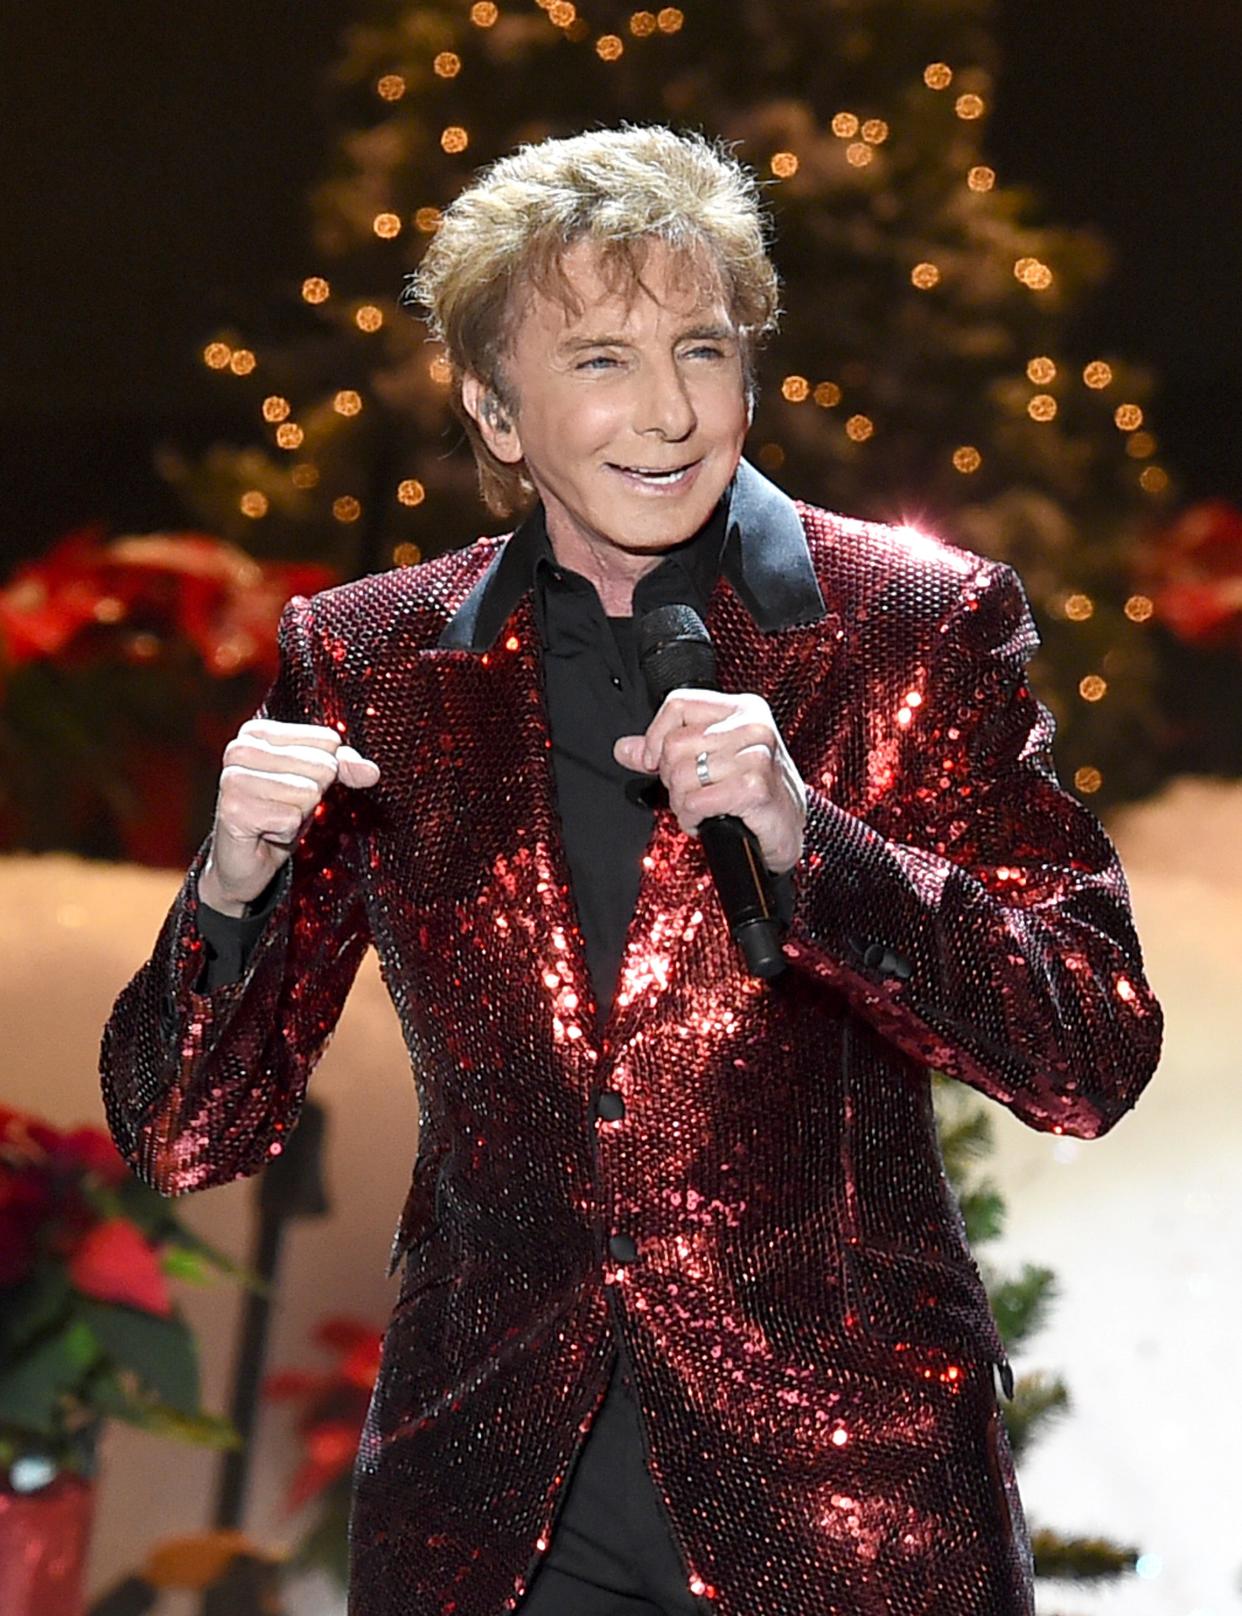 A throng of "Fanilows" will flock to Nationwide Arena on Friday for a concert by iconic singer-songwriter Barry Manilow.